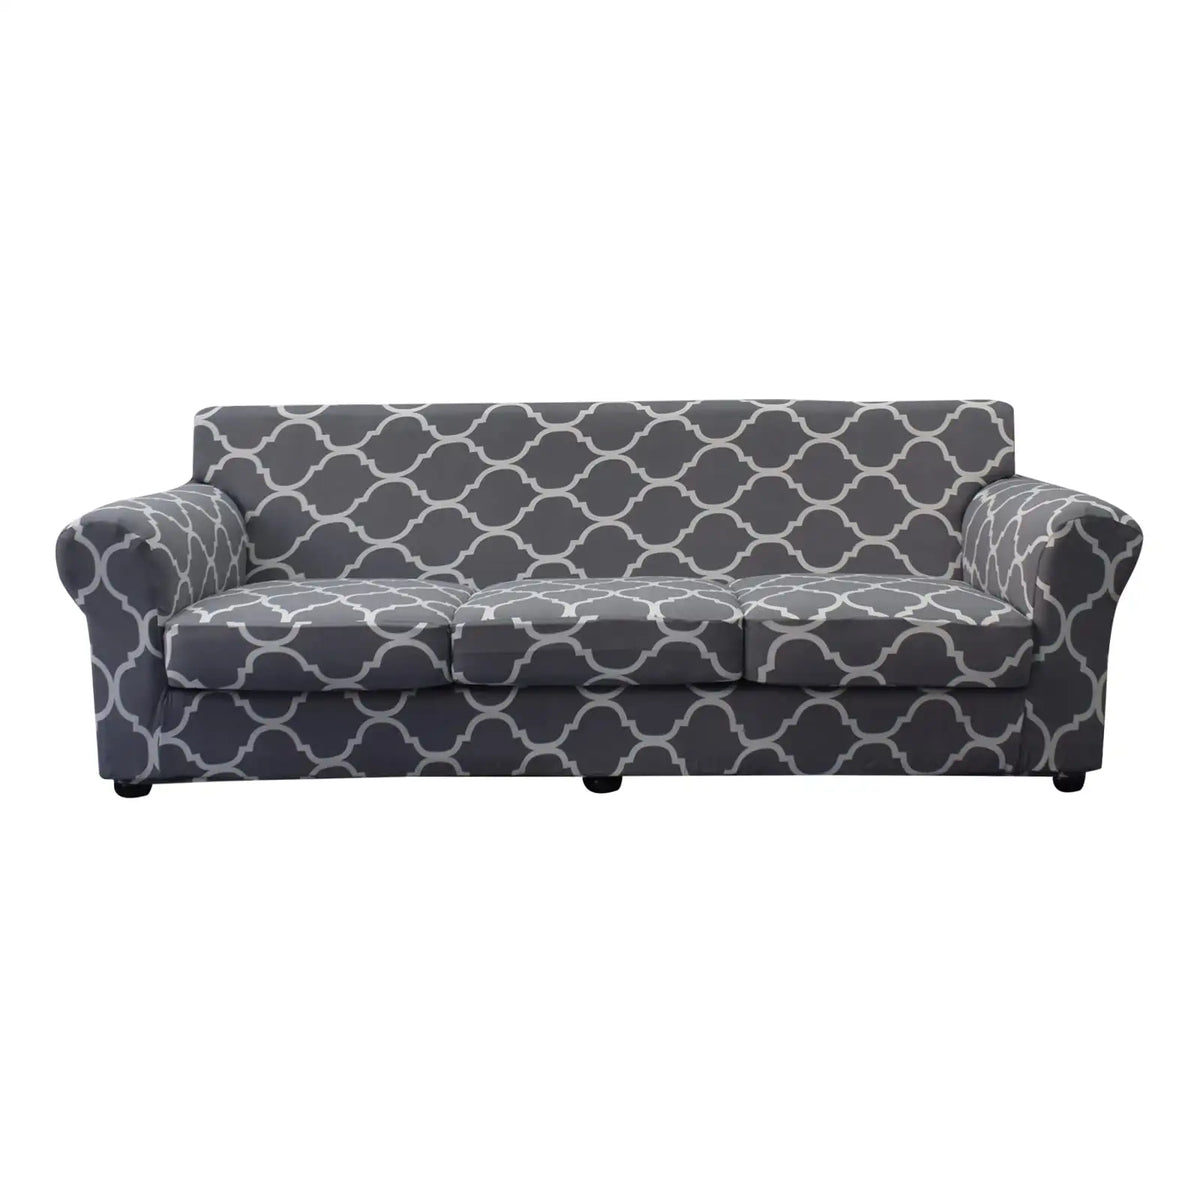 Floral Printed Sofa Cover Couch Slipcovers with 1/2/3 Seat Cushion Cover Crfatop %sku%